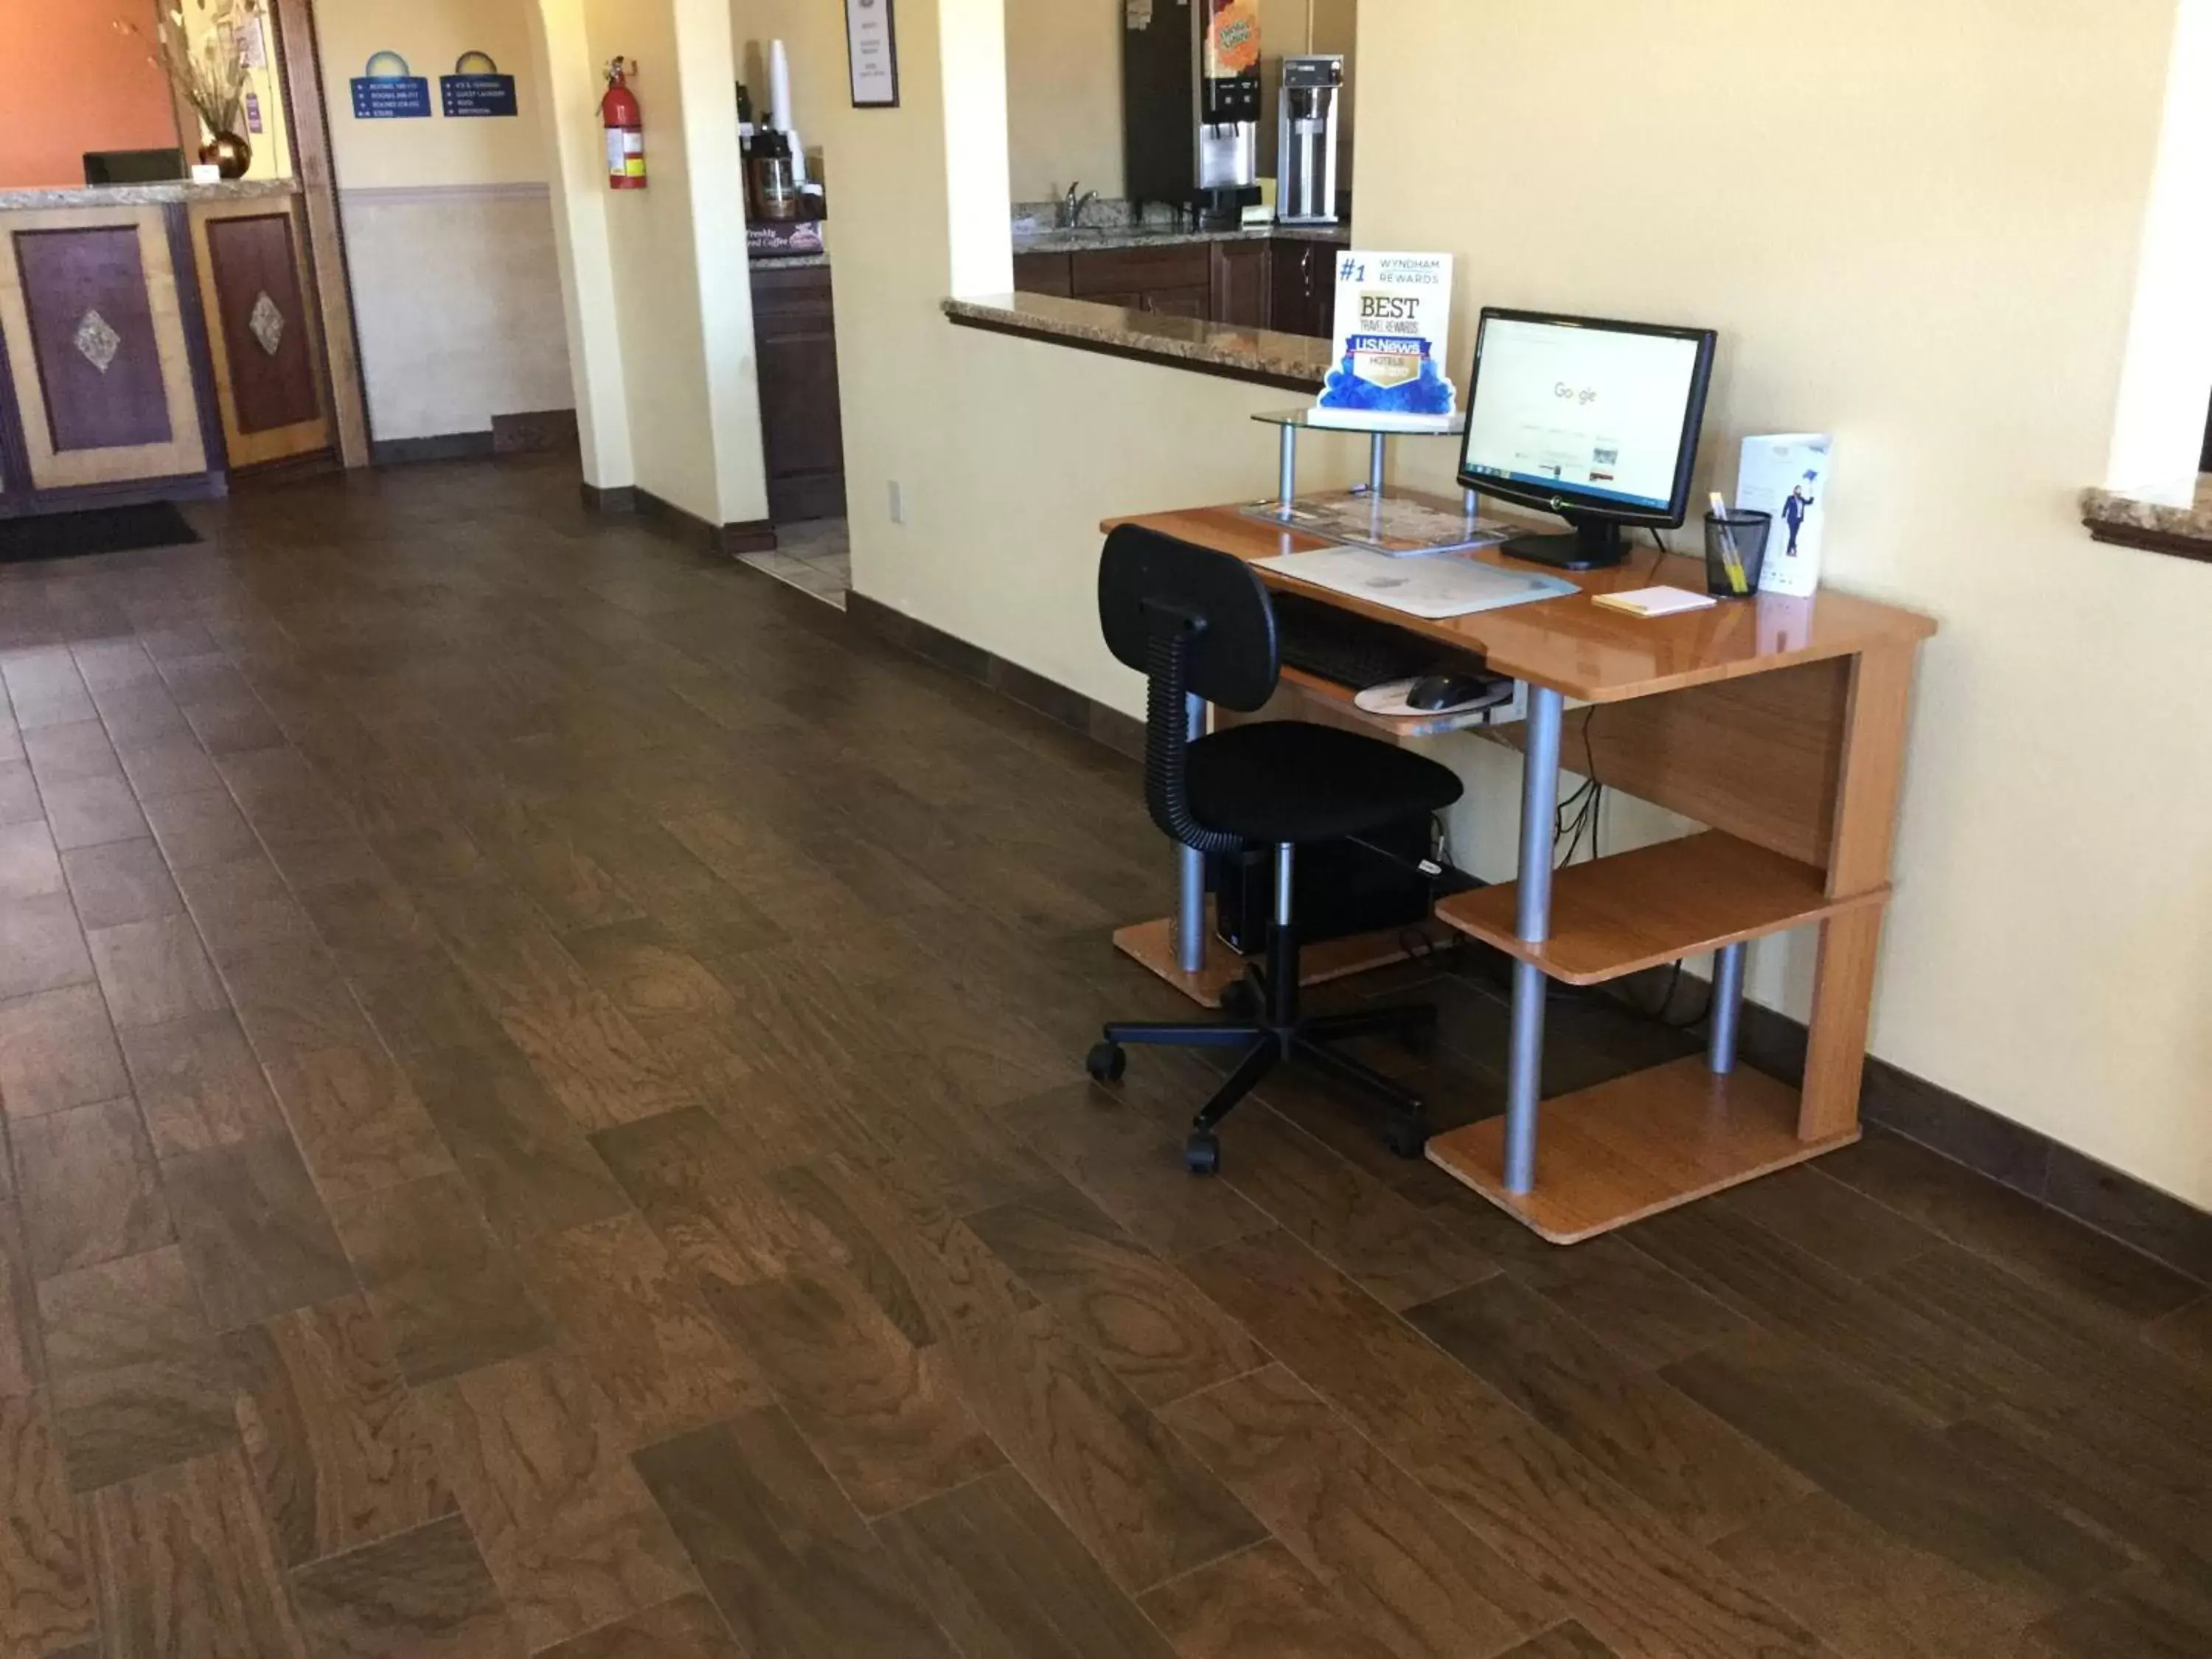 Business facilities in Days Inn by Wyndham Hurricane/Zion National Park Area